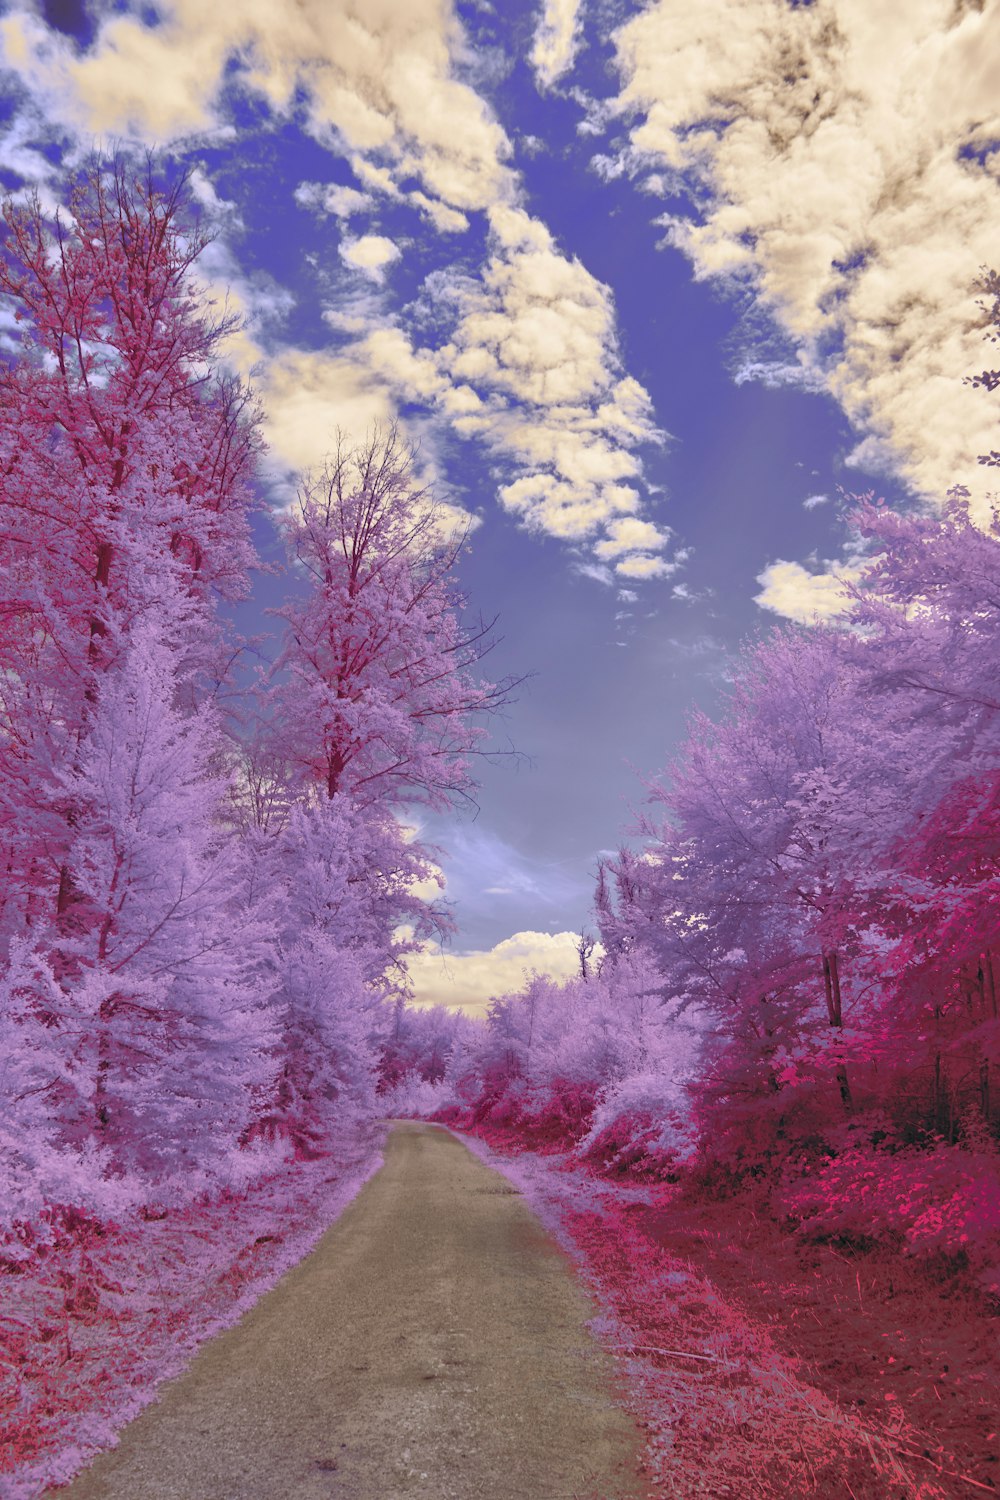 a dirt road surrounded by pink trees under a cloudy sky